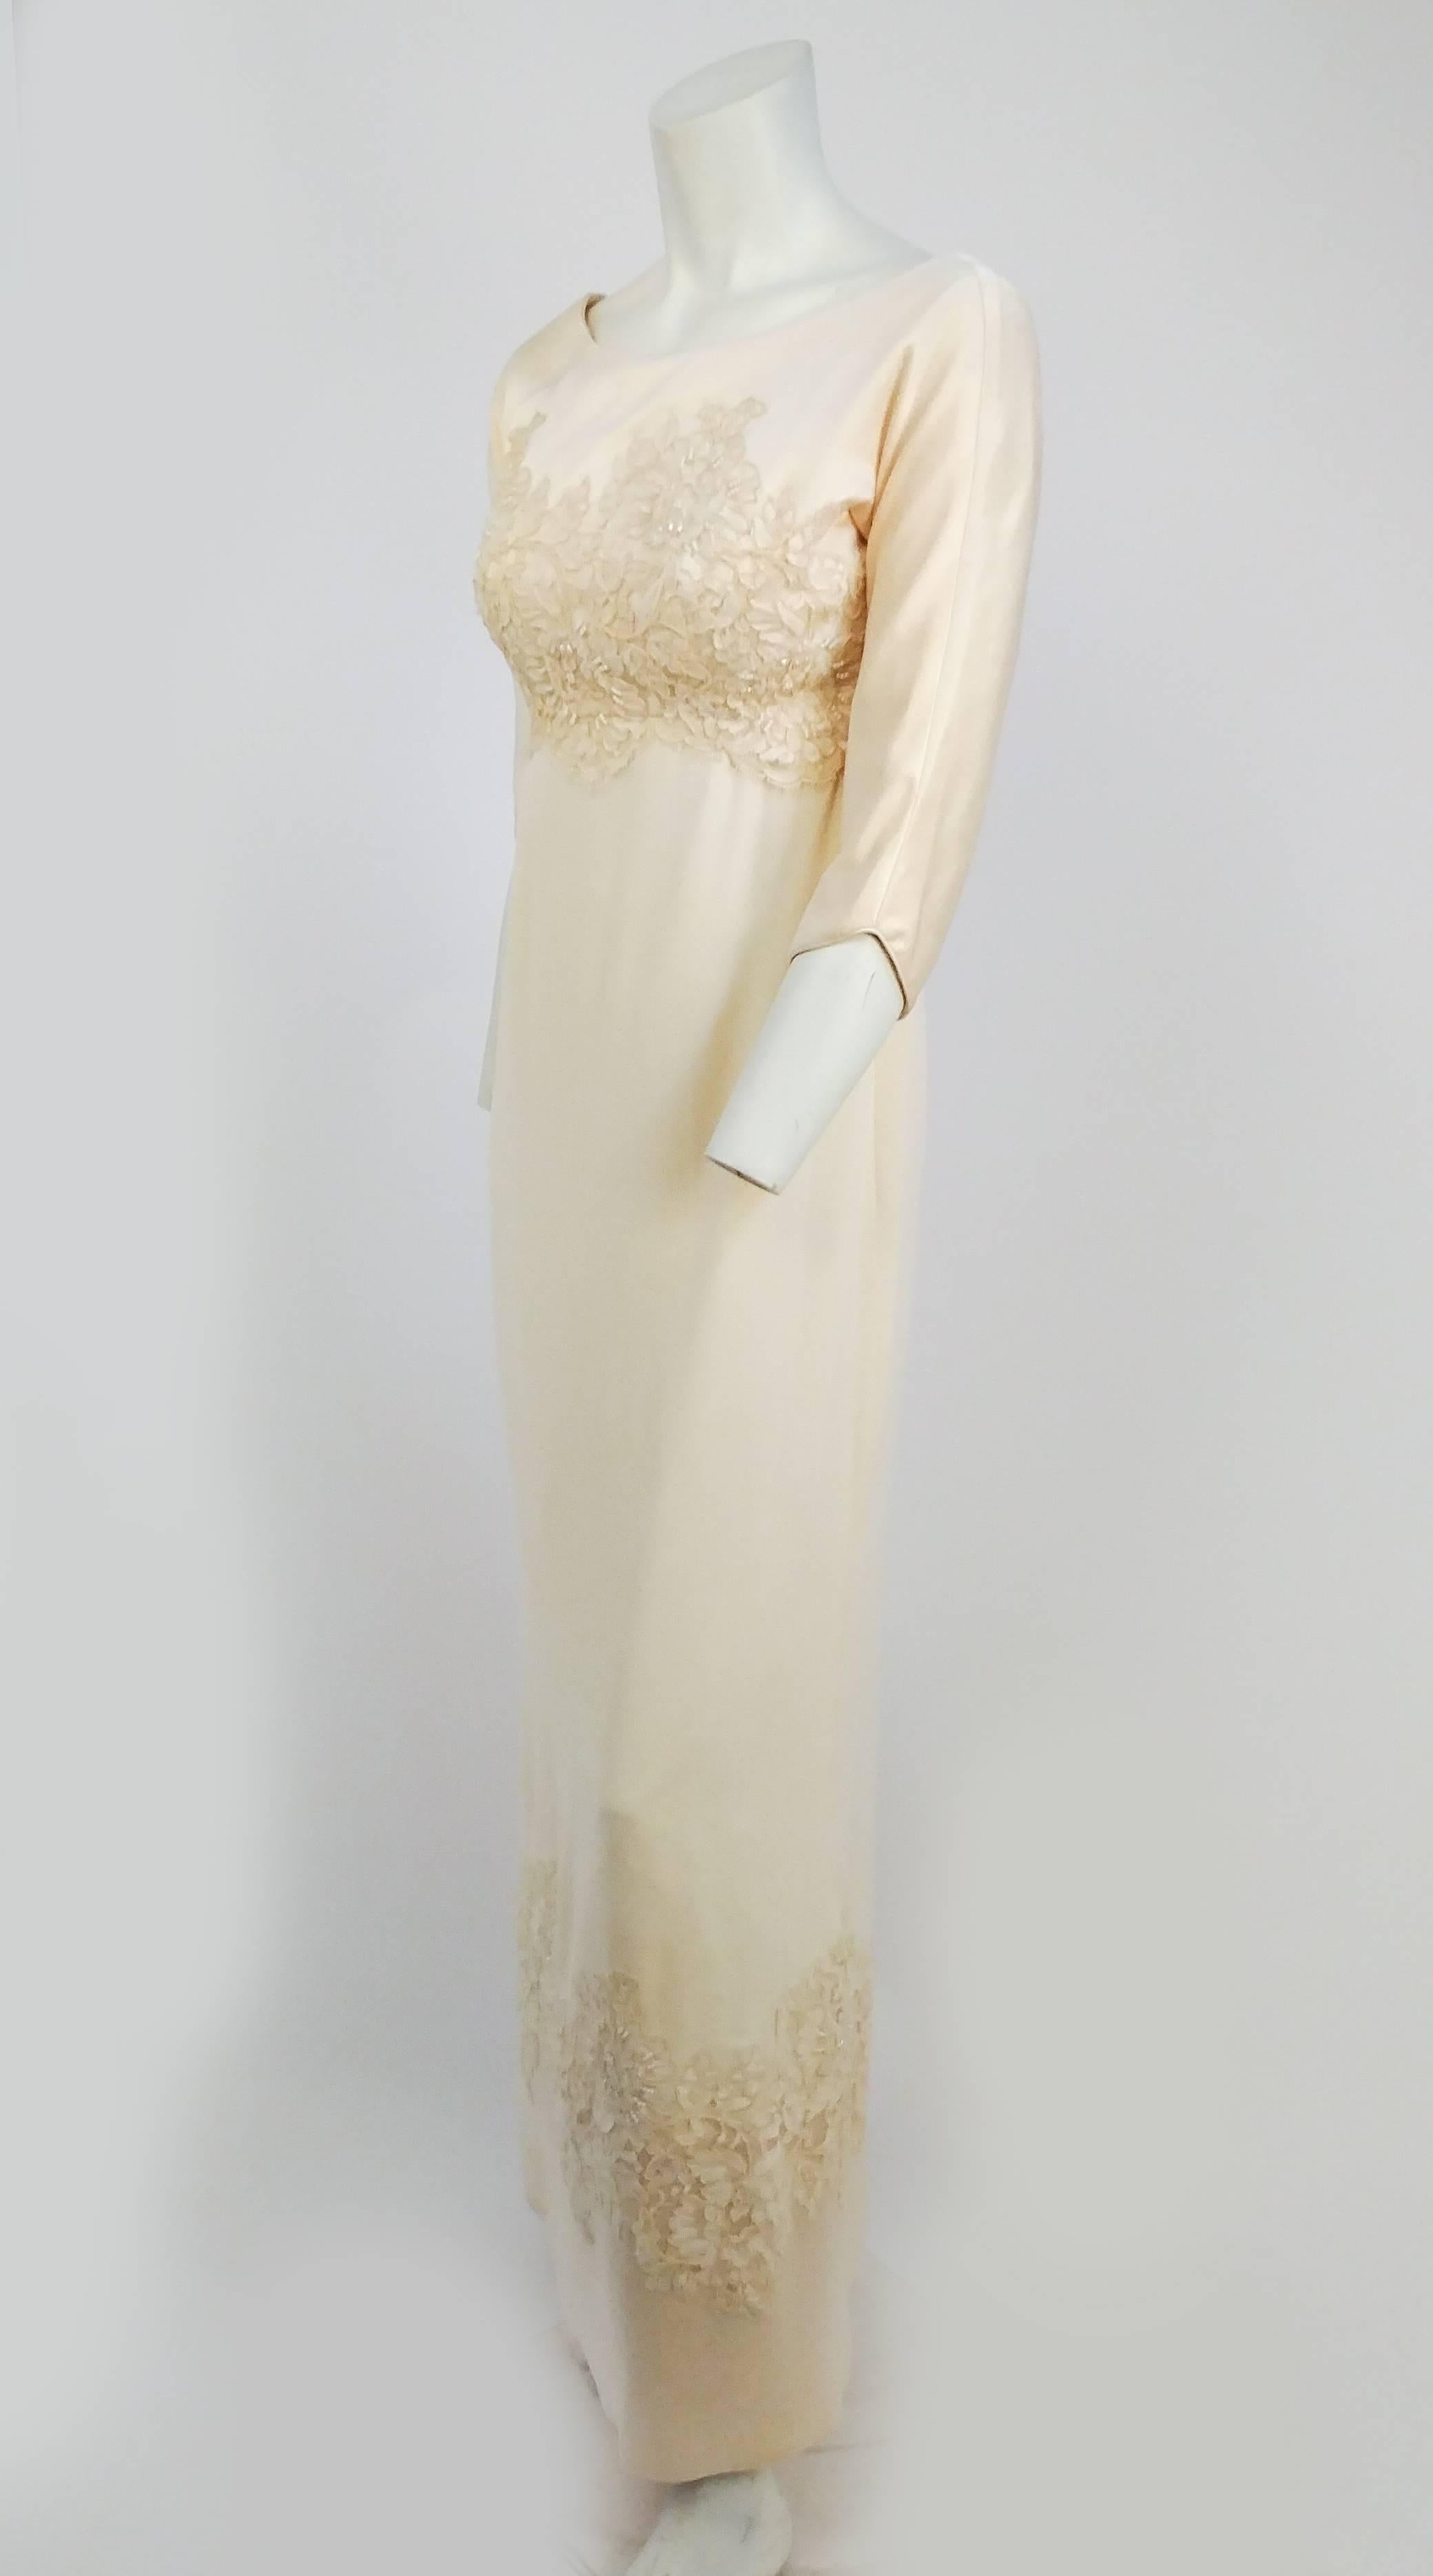 1960s Ivory Silk Crepe Wedding Dress with Beaded Applique.